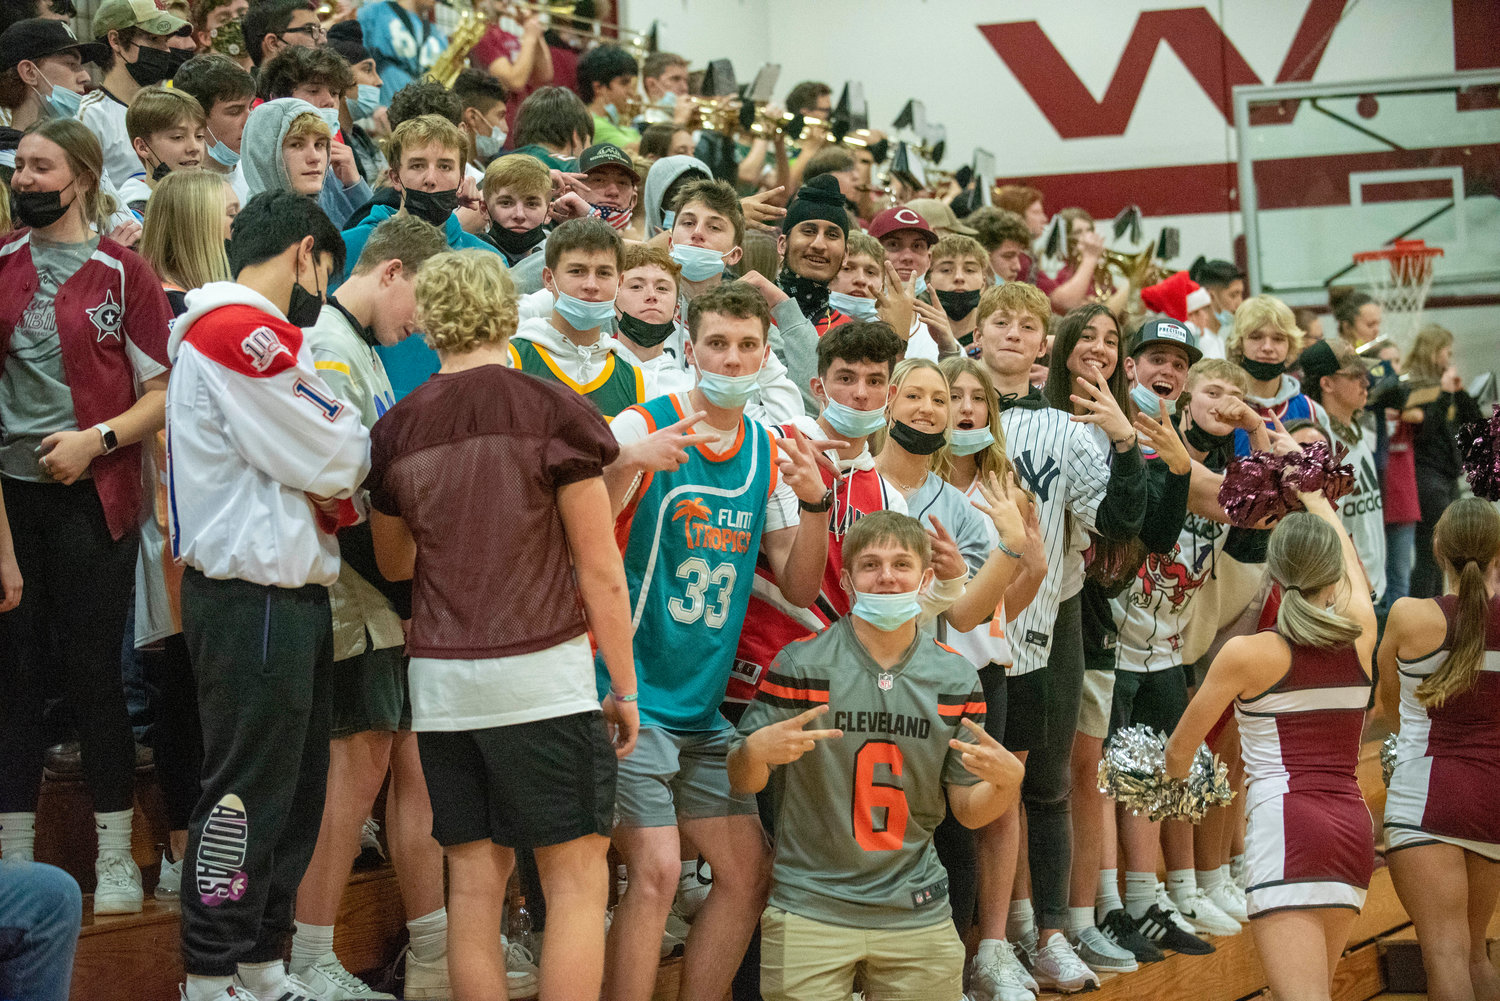 W.F. West's student section poses for a photo during the girls basketball team's home game against Shelton on Dec. 7.